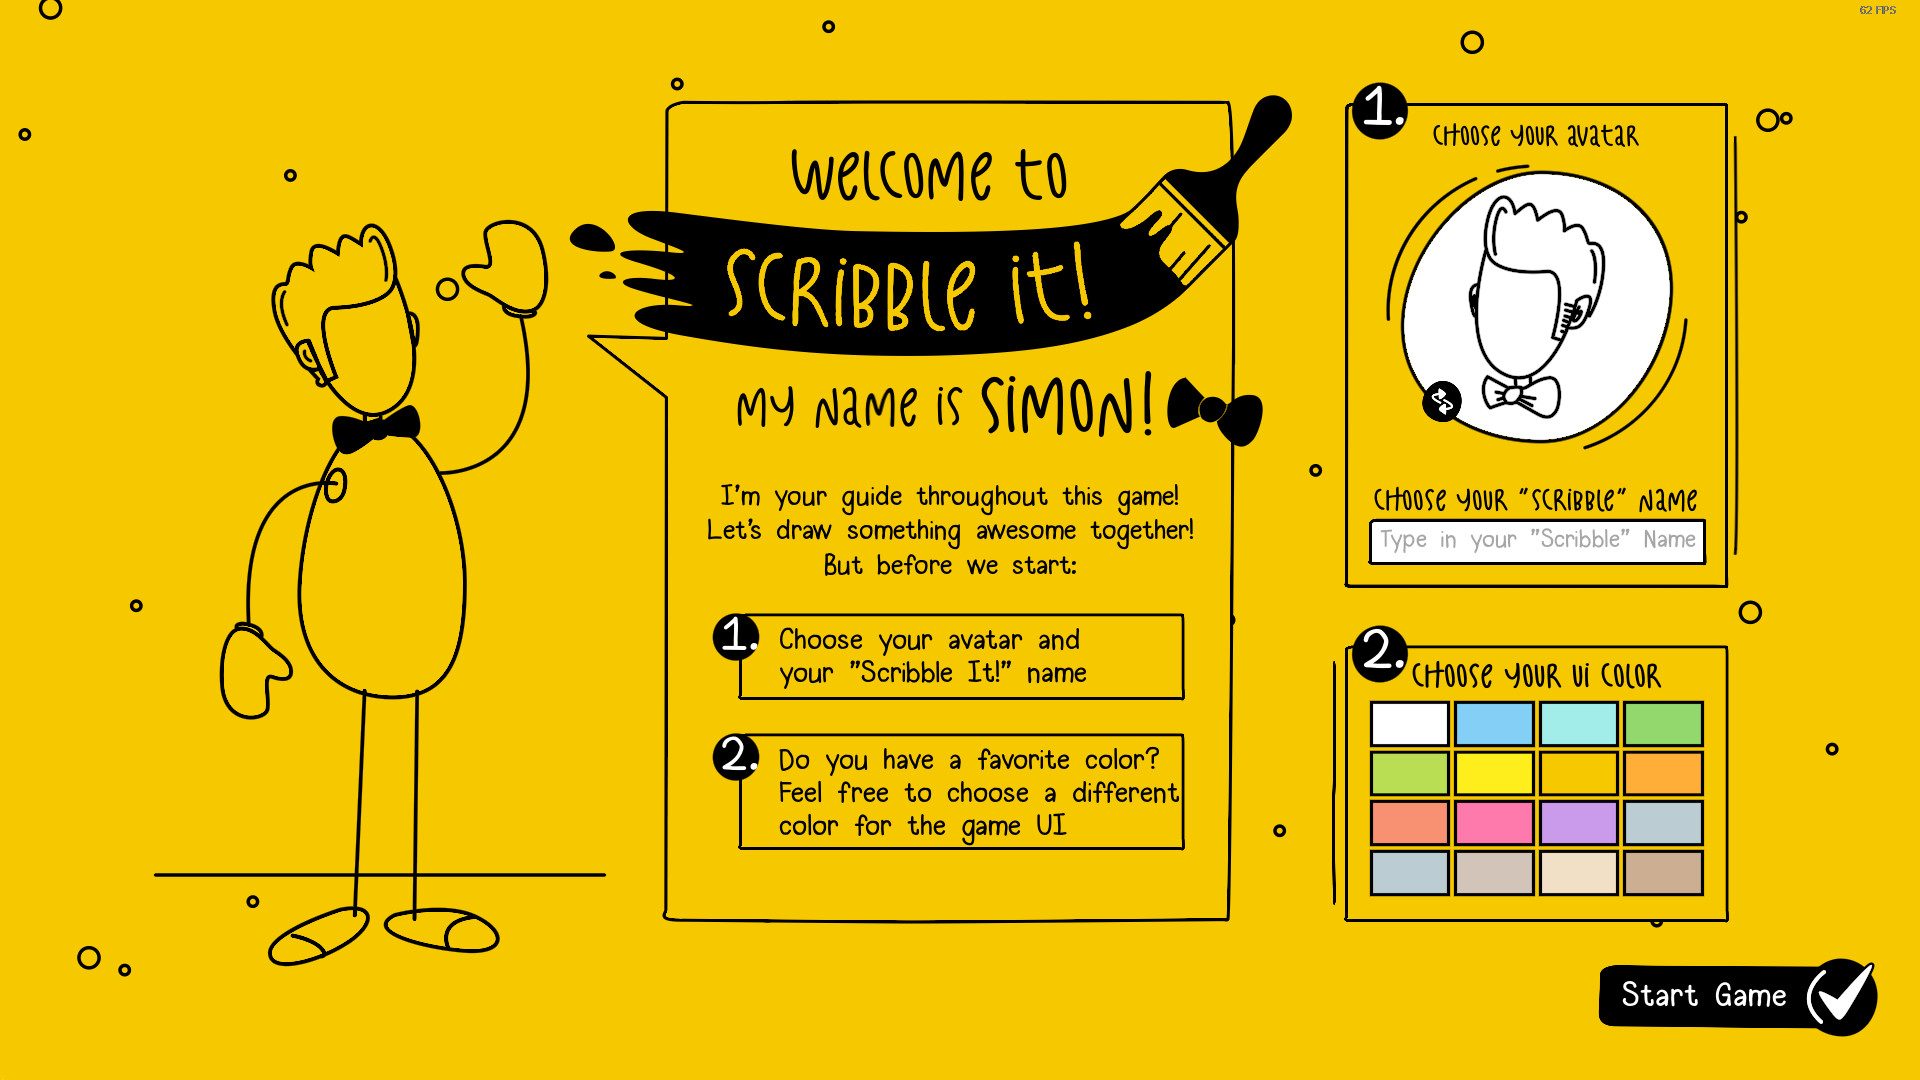 Scribble It! download the new